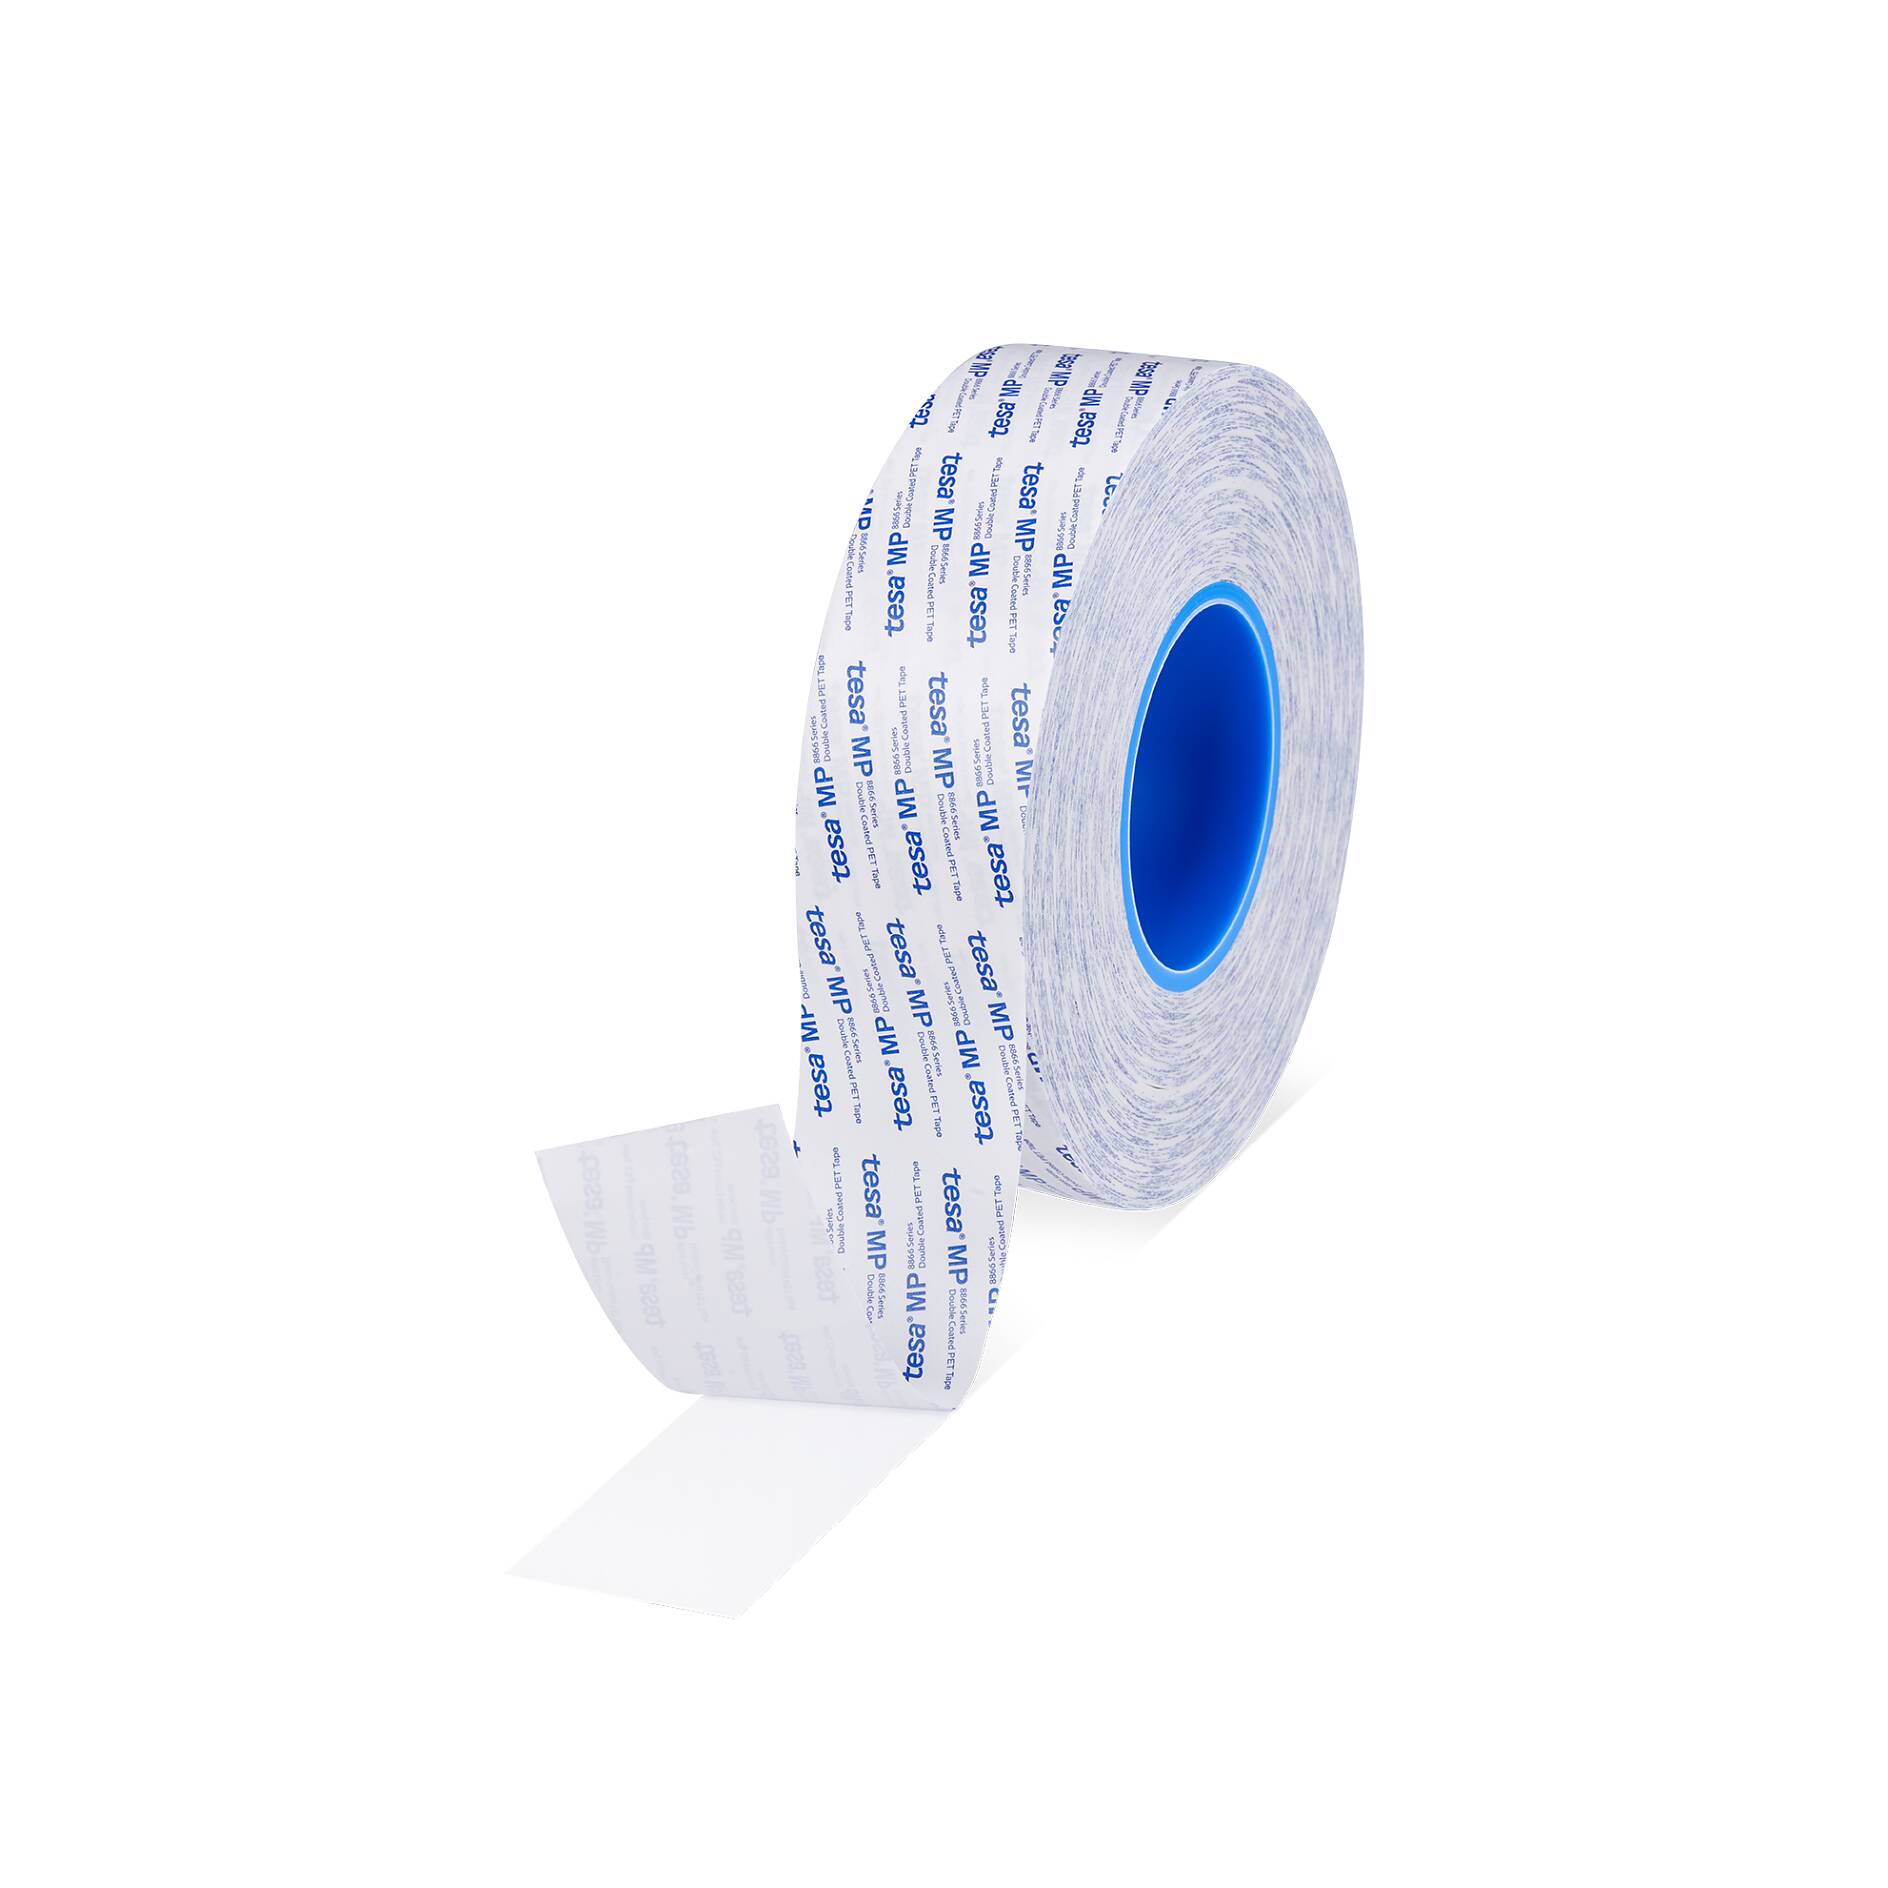 tesa Double Sided White PVC Tape (4970): 3/4 in. x 60 yds. (White)